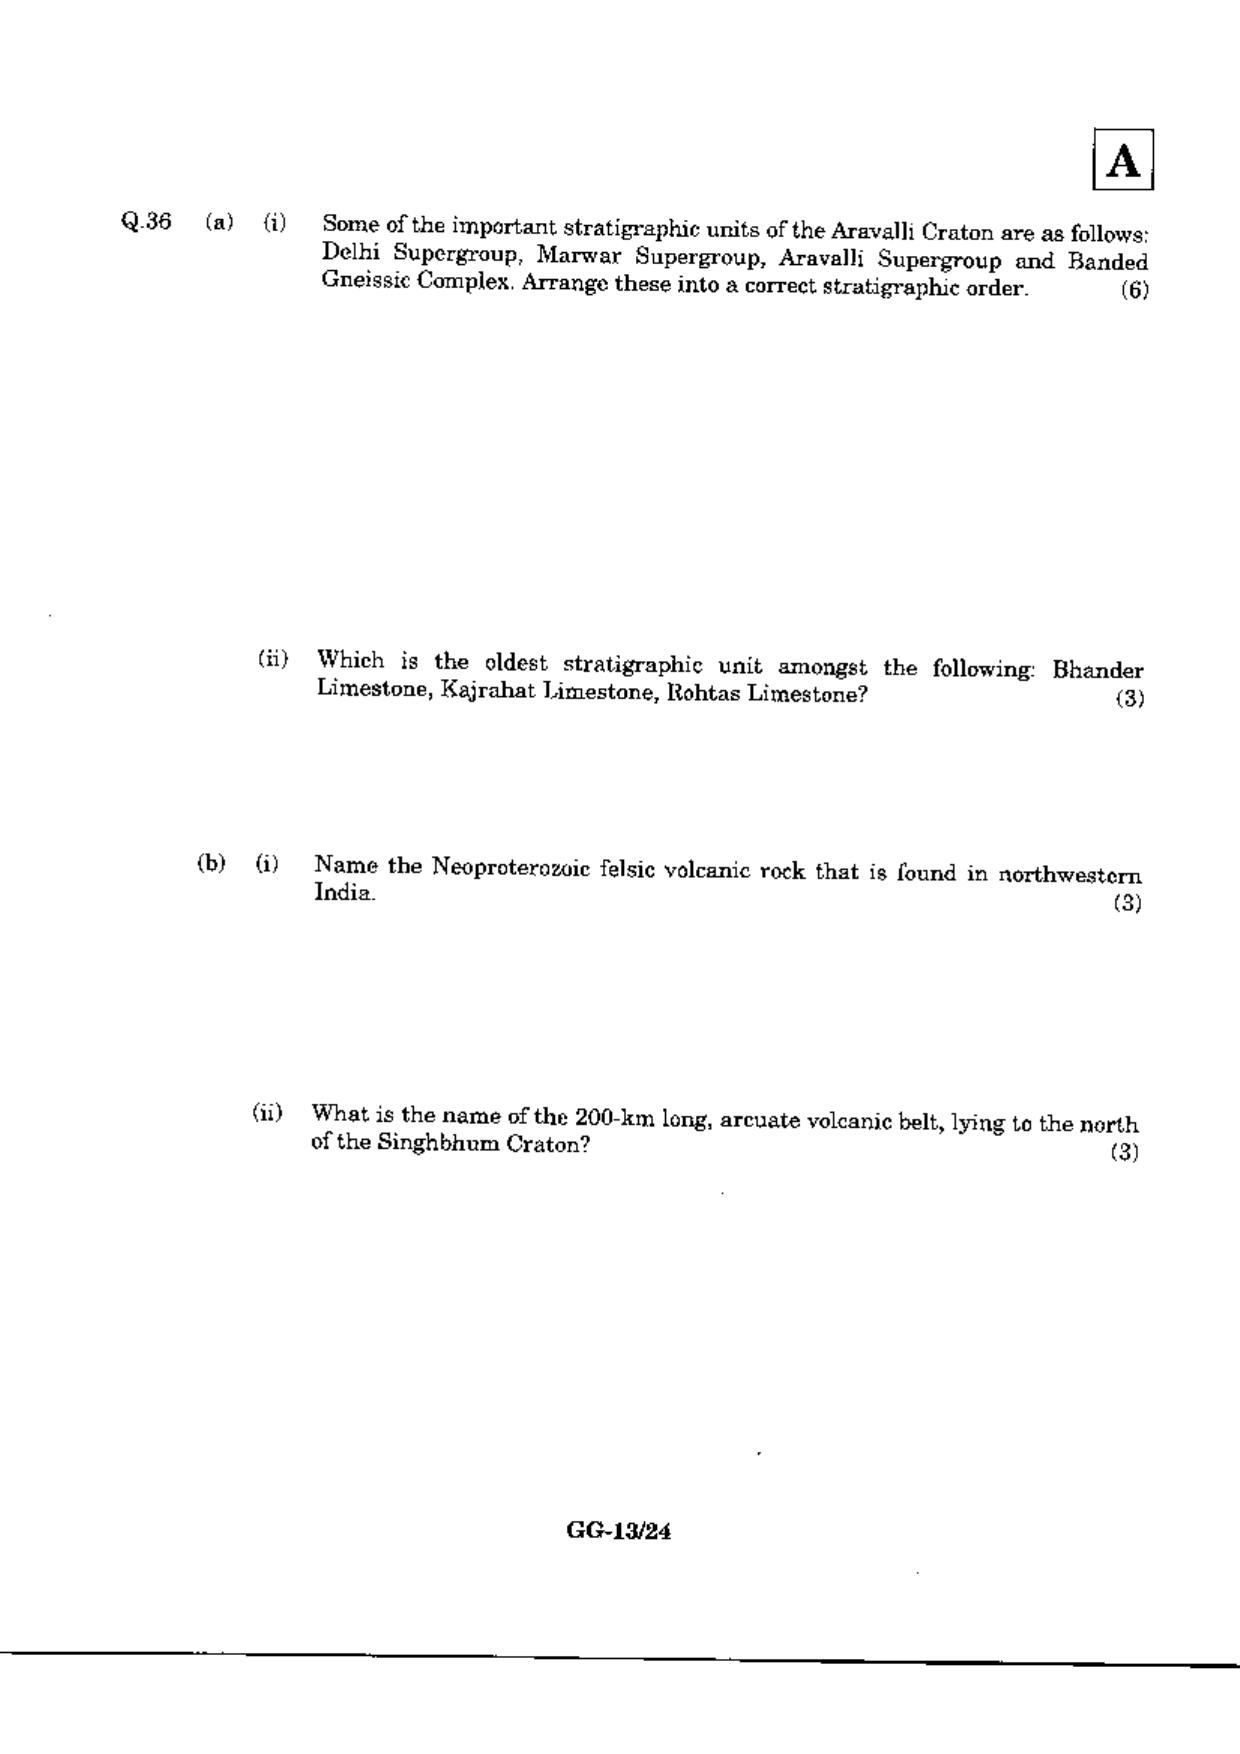 JAM 2010: GG Question Paper - Page 15